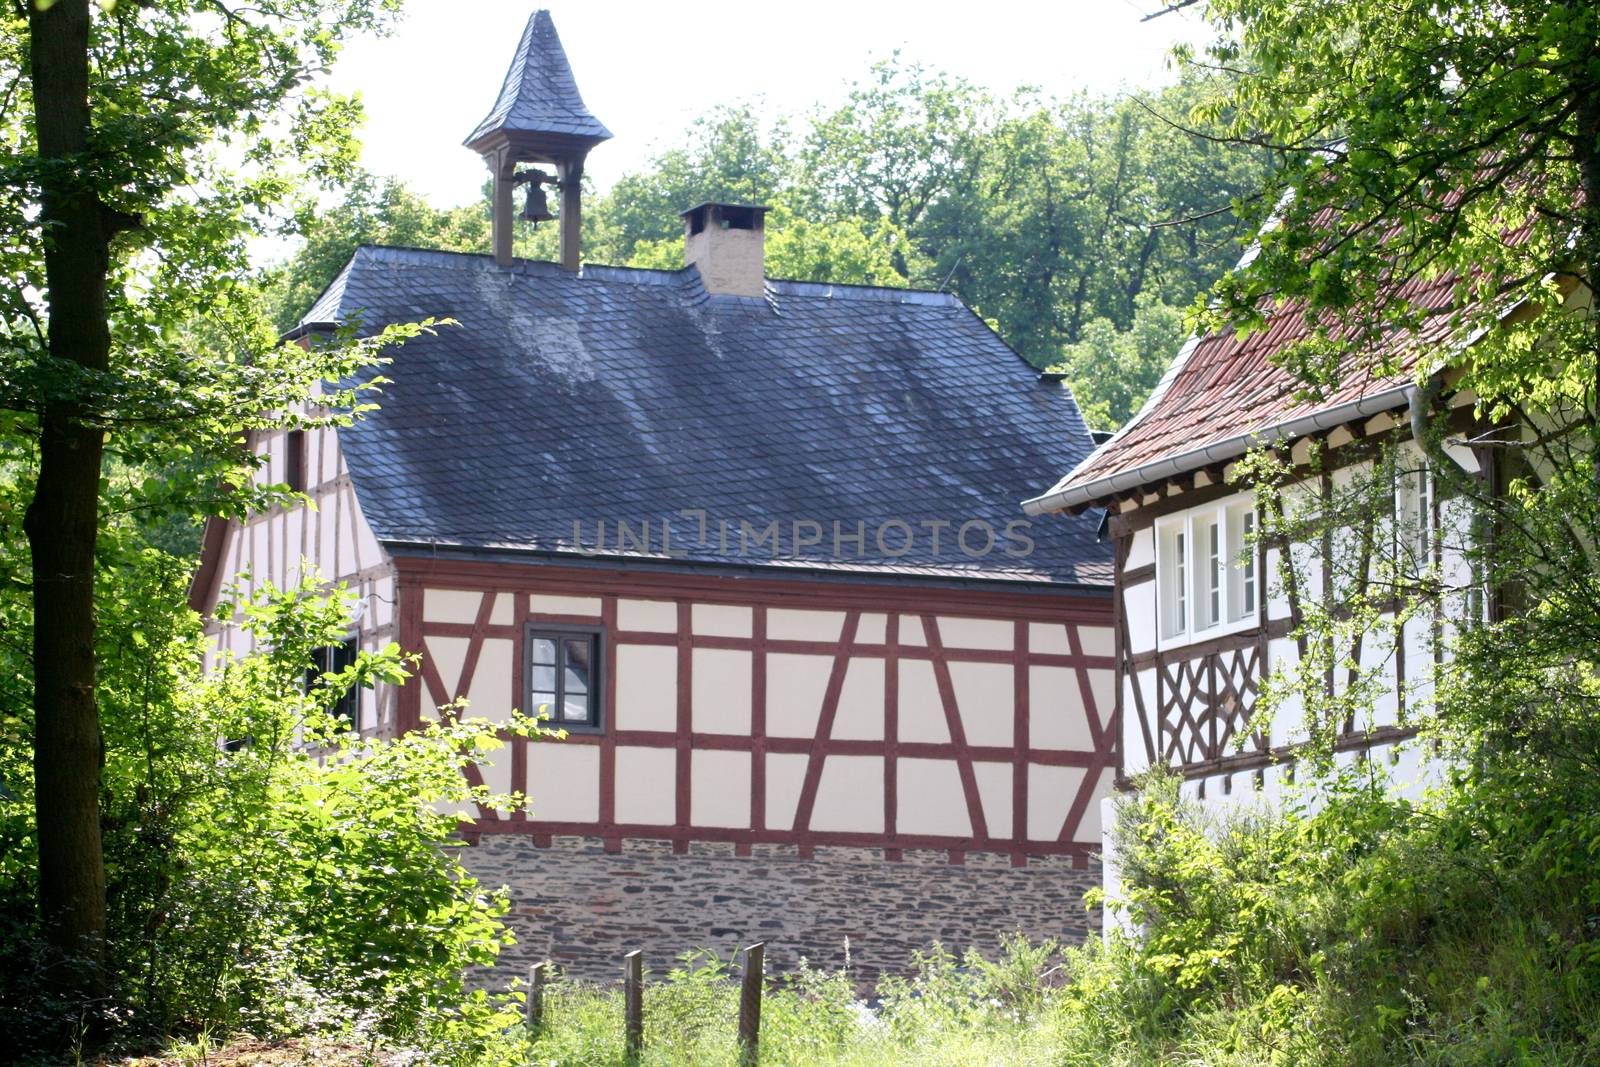 An old beautiful renovated half-timbered House, with trees in the background